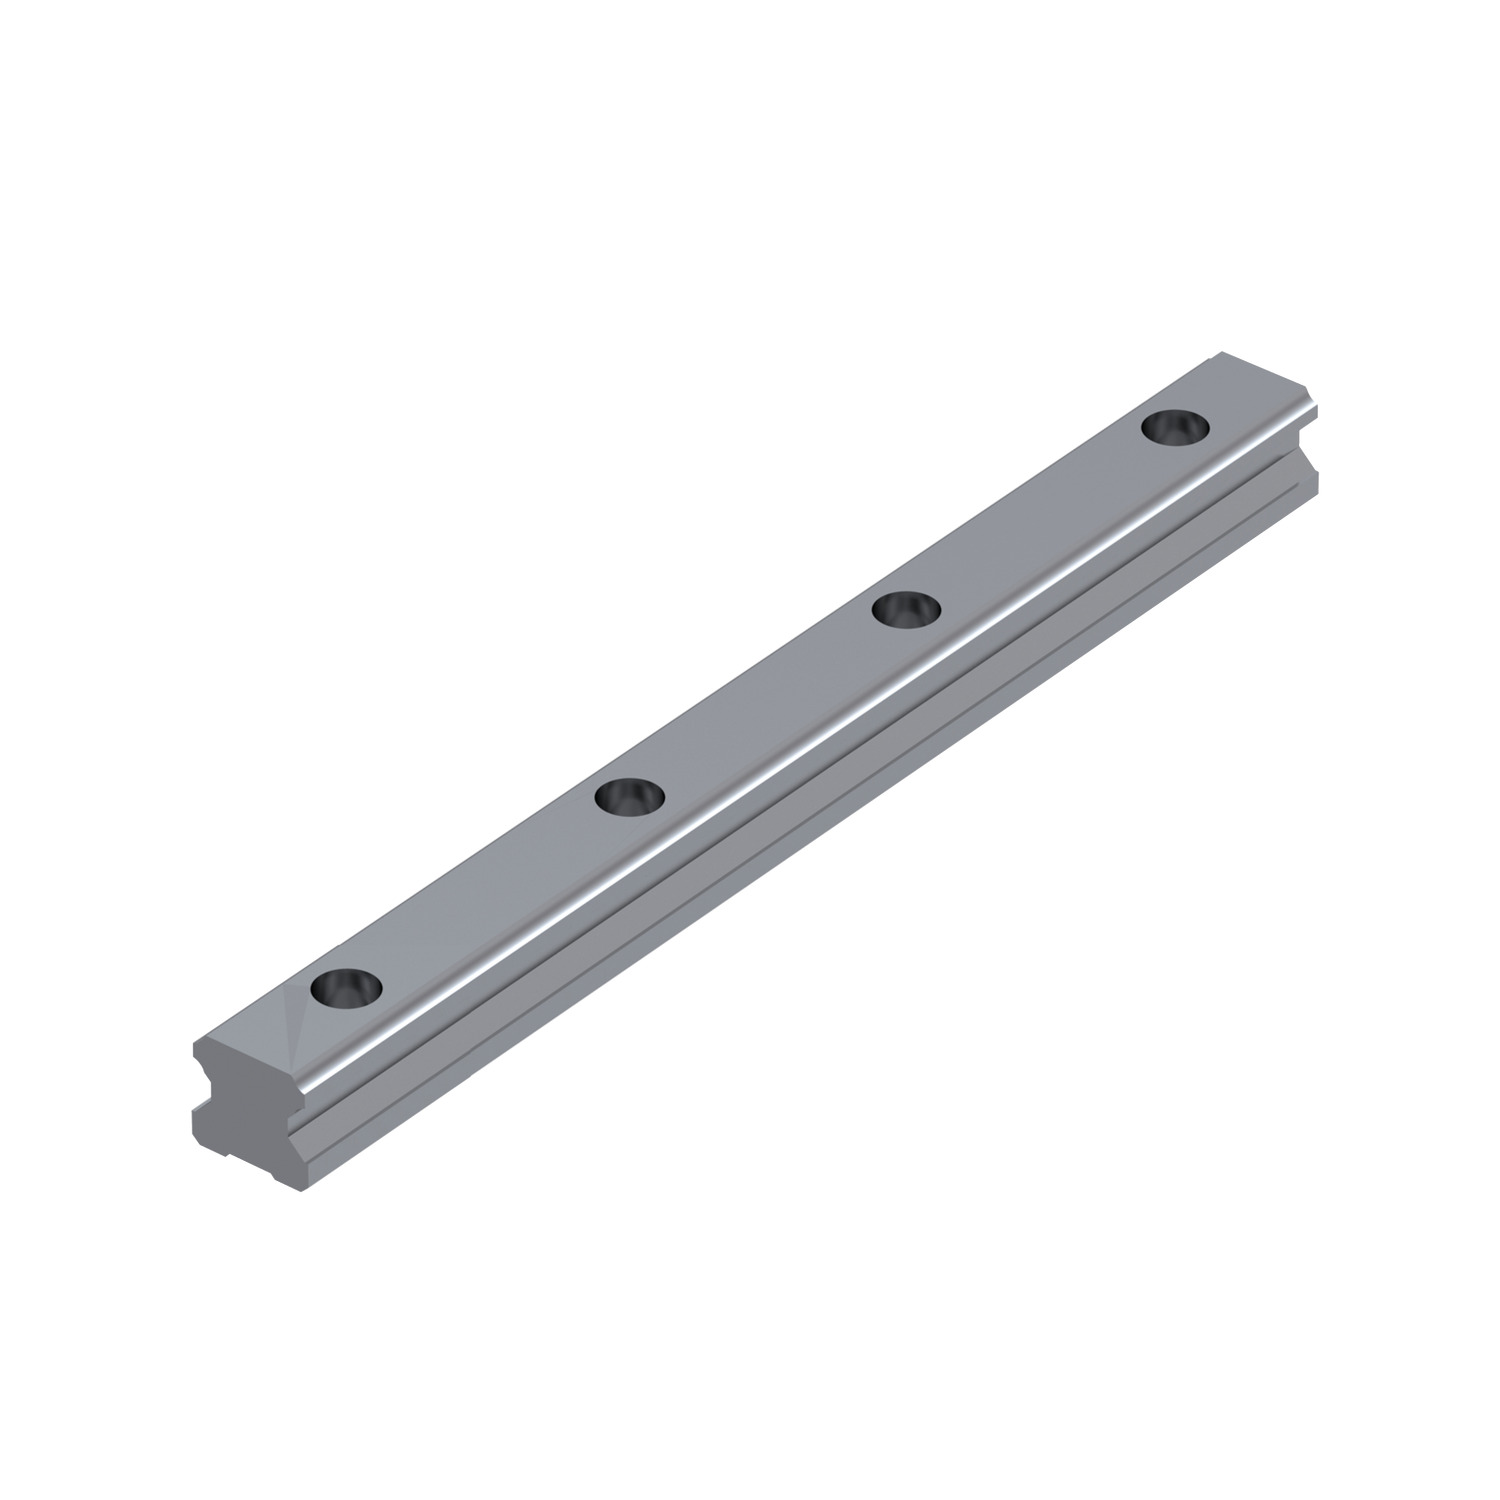 L1016.35-1640 Linear guide rail 35mm 1640 Hardened and ground steel. EC:20165017 WG:05063055291156